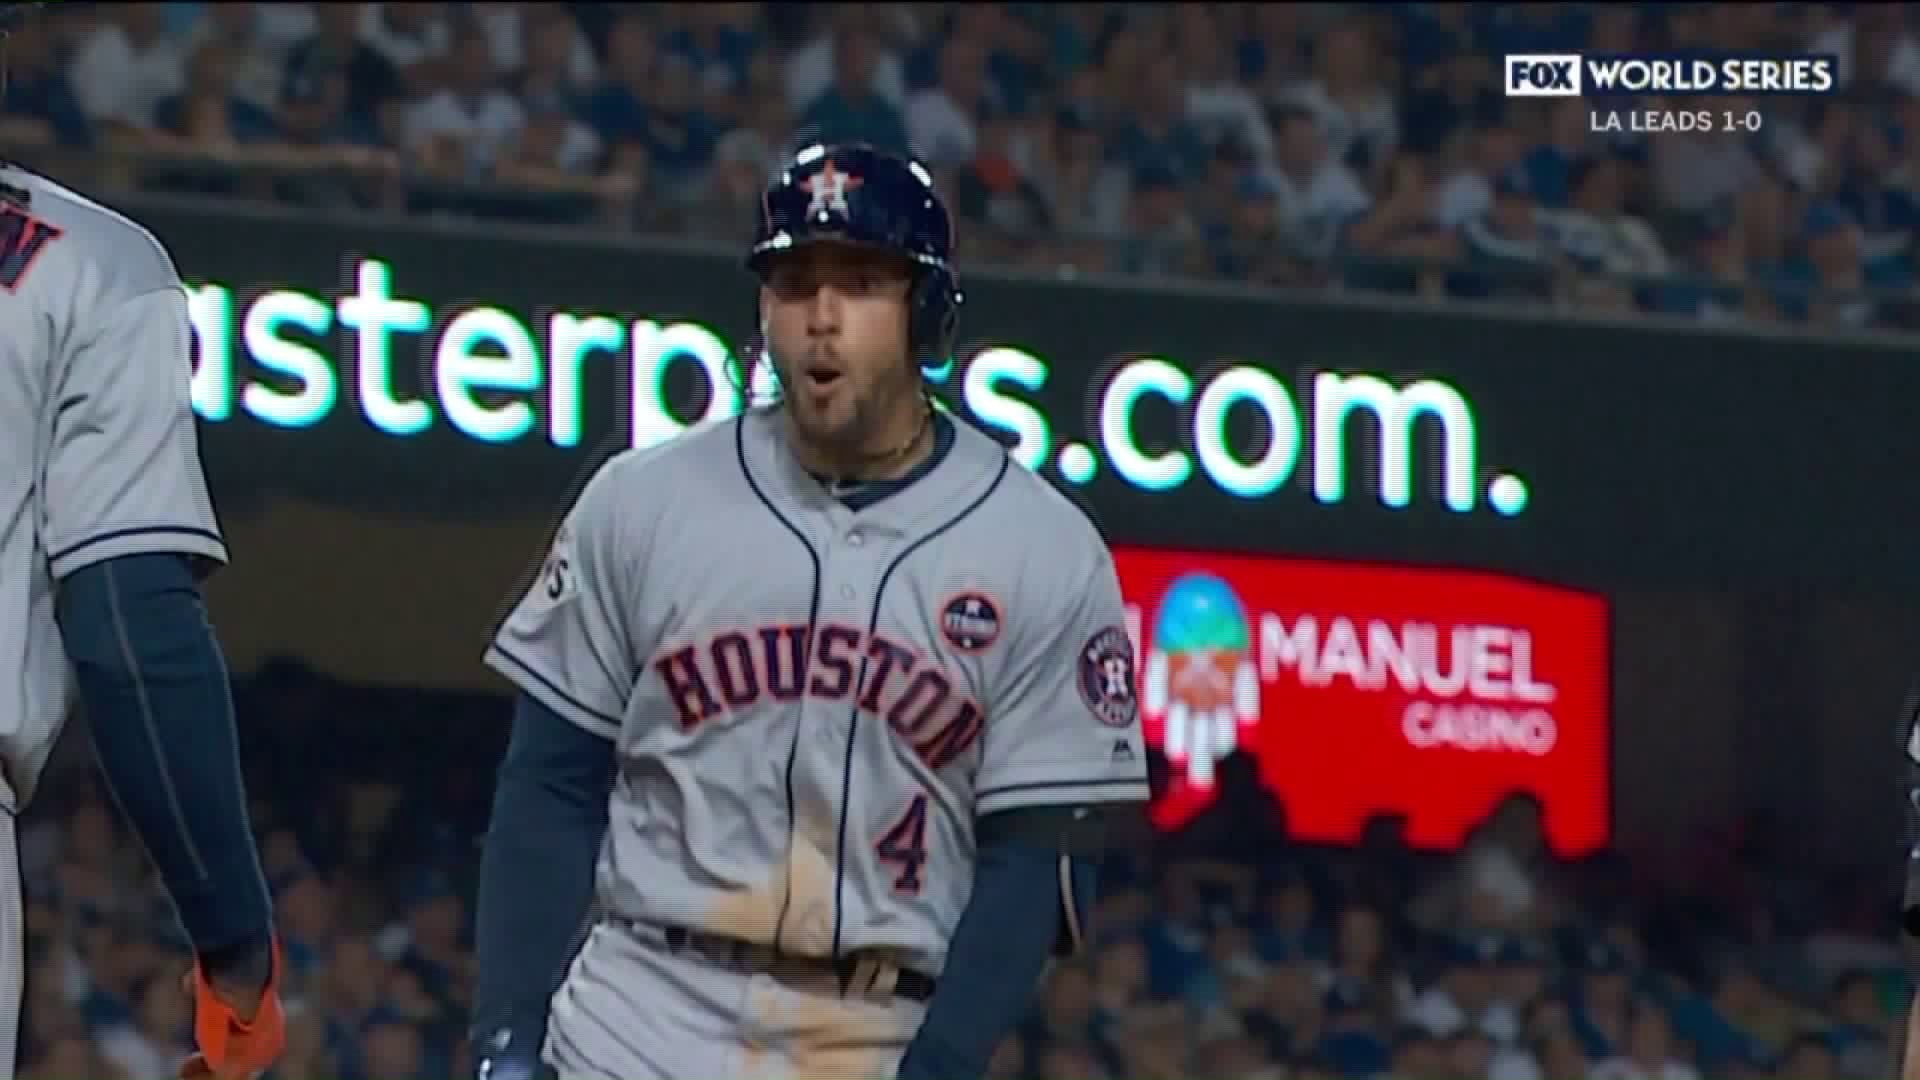 George Springer coming clutch in World Series